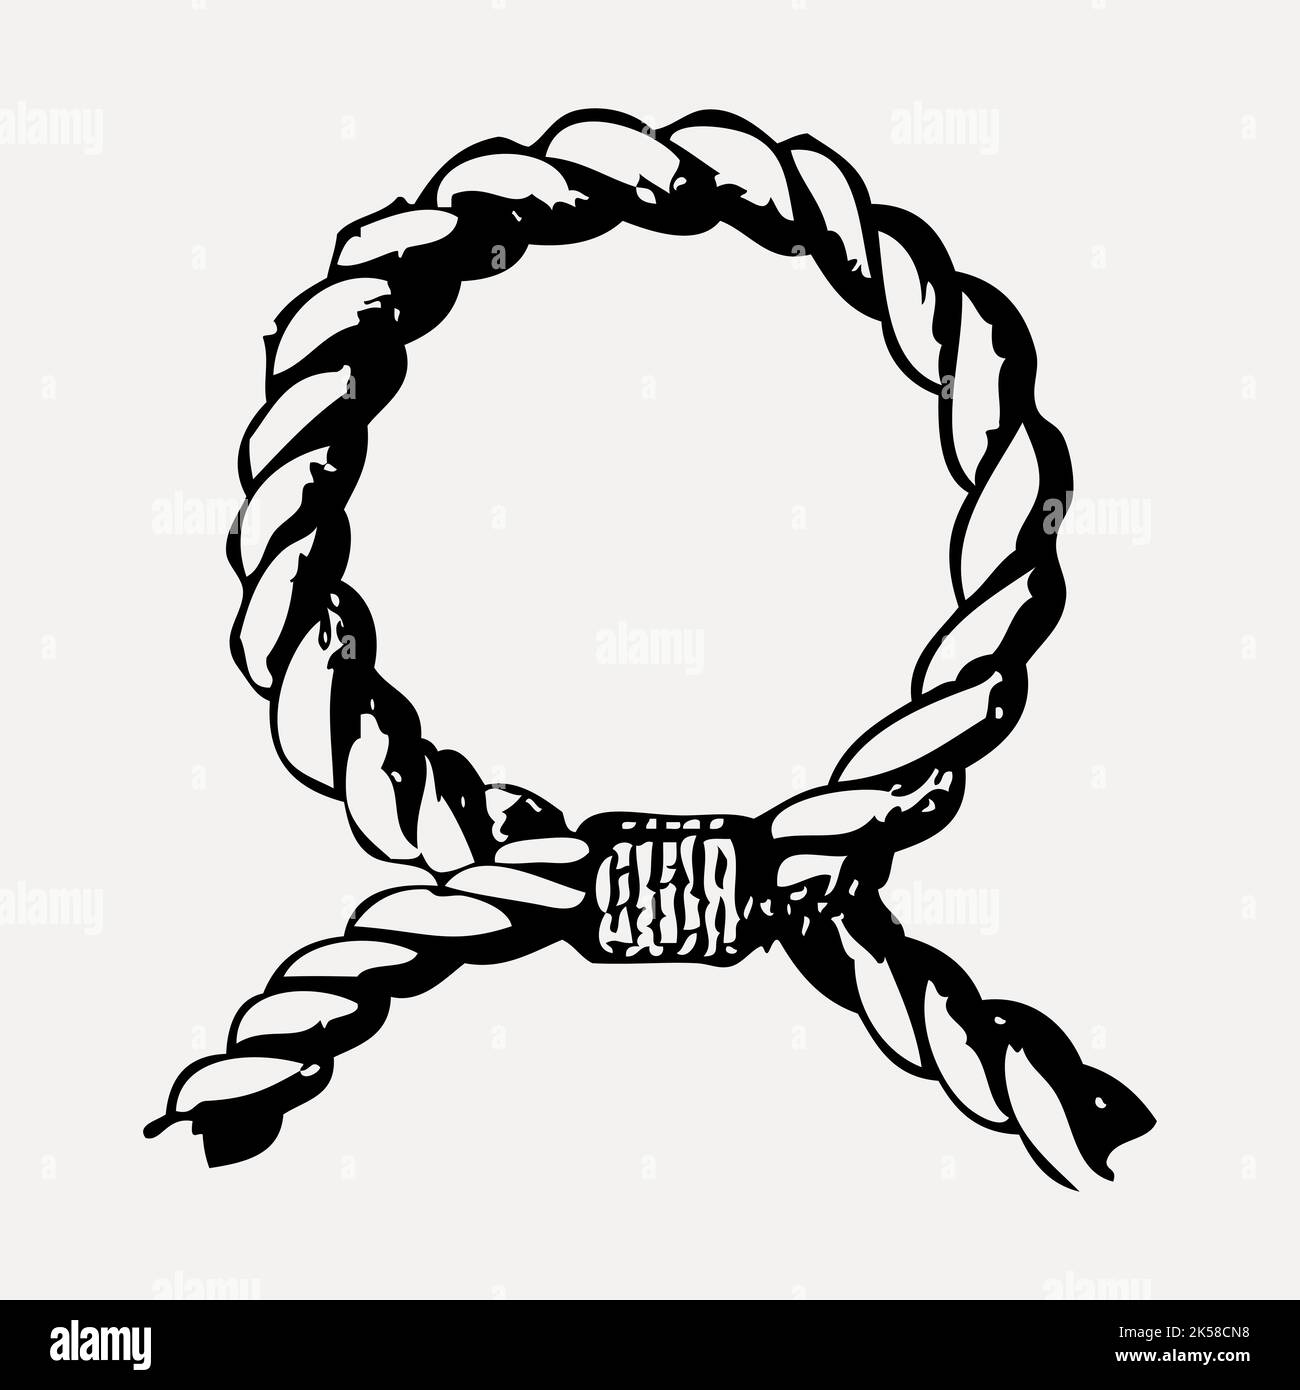 Knot rope hand drawn clipart, tool illustration vector Stock Vector Image &  Art - Alamy